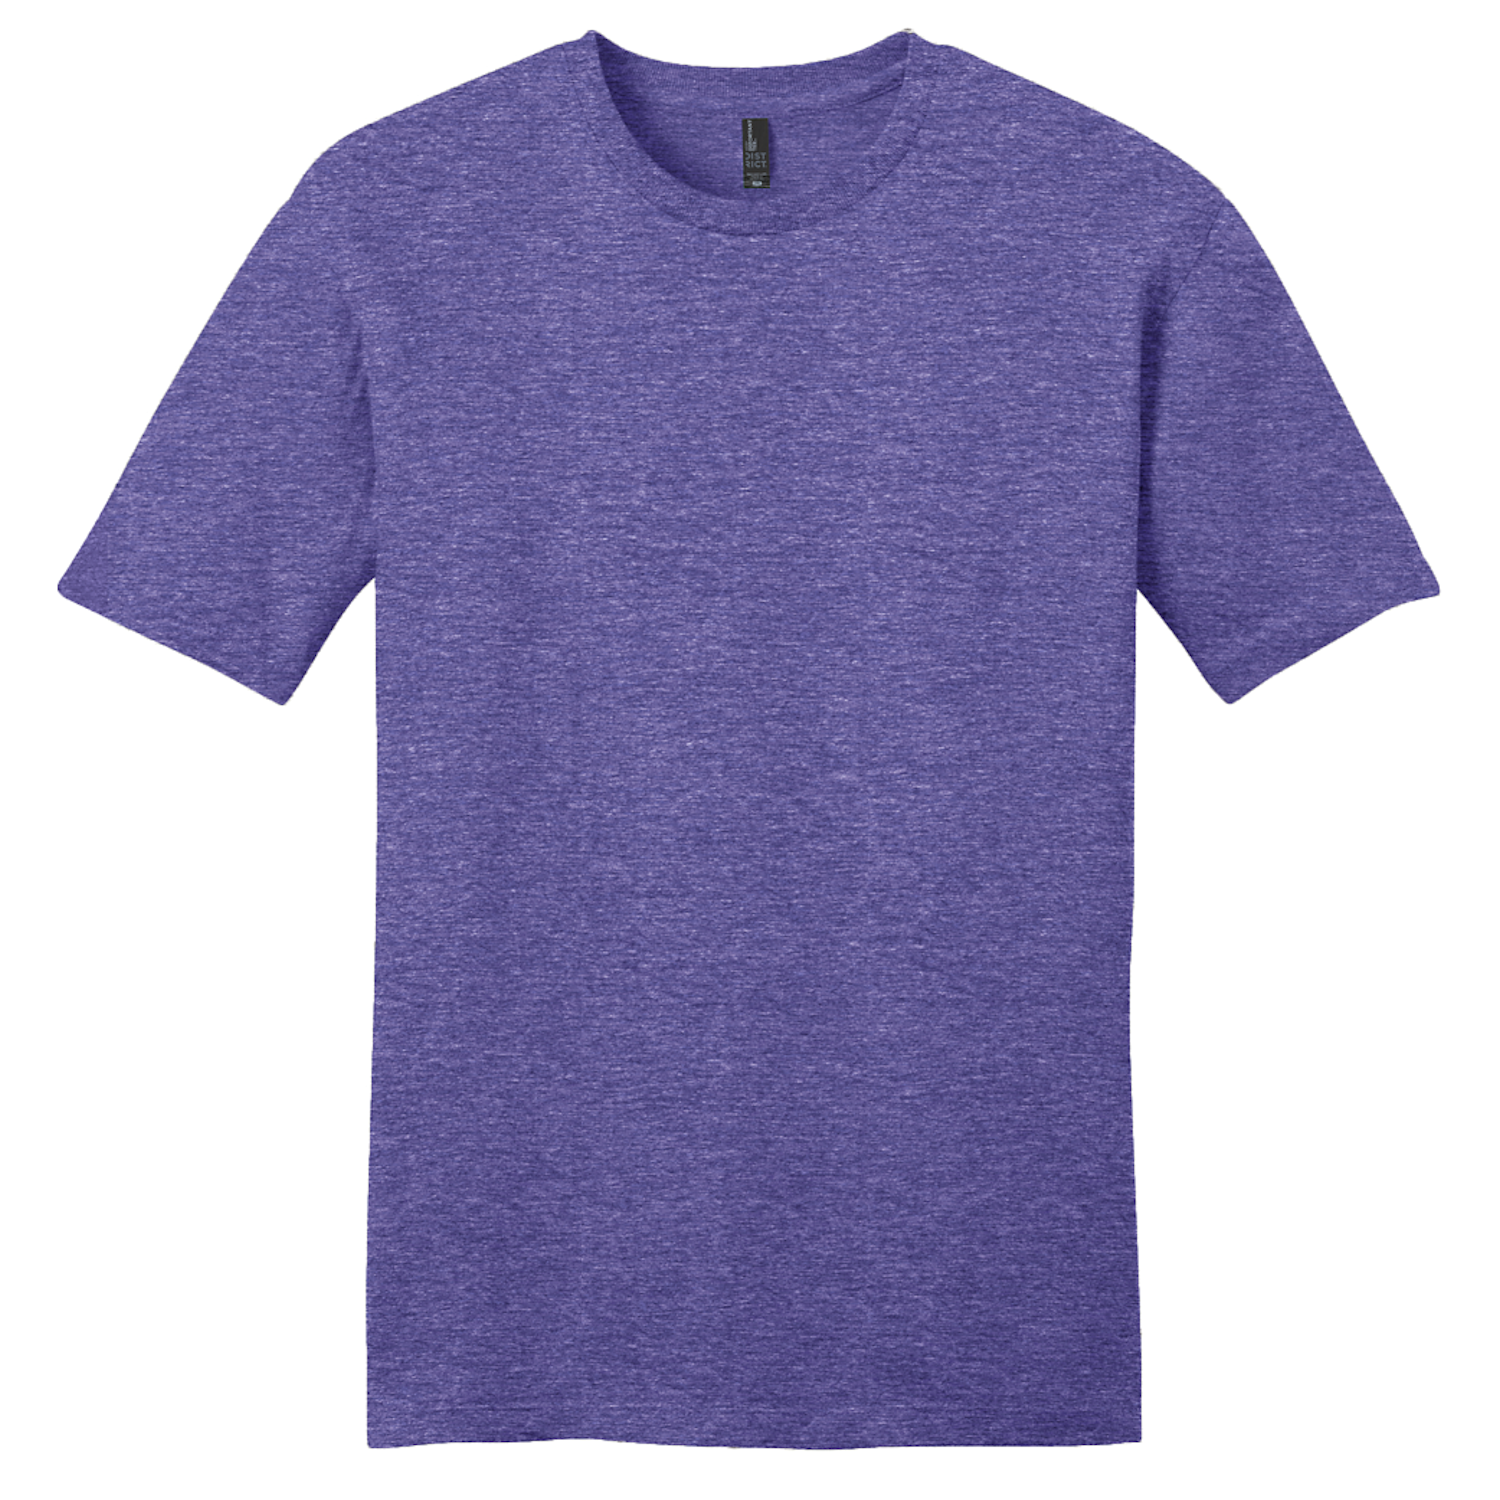 Heather Soft Style Short Sleeve Tee: Color Options | Hands On Originals